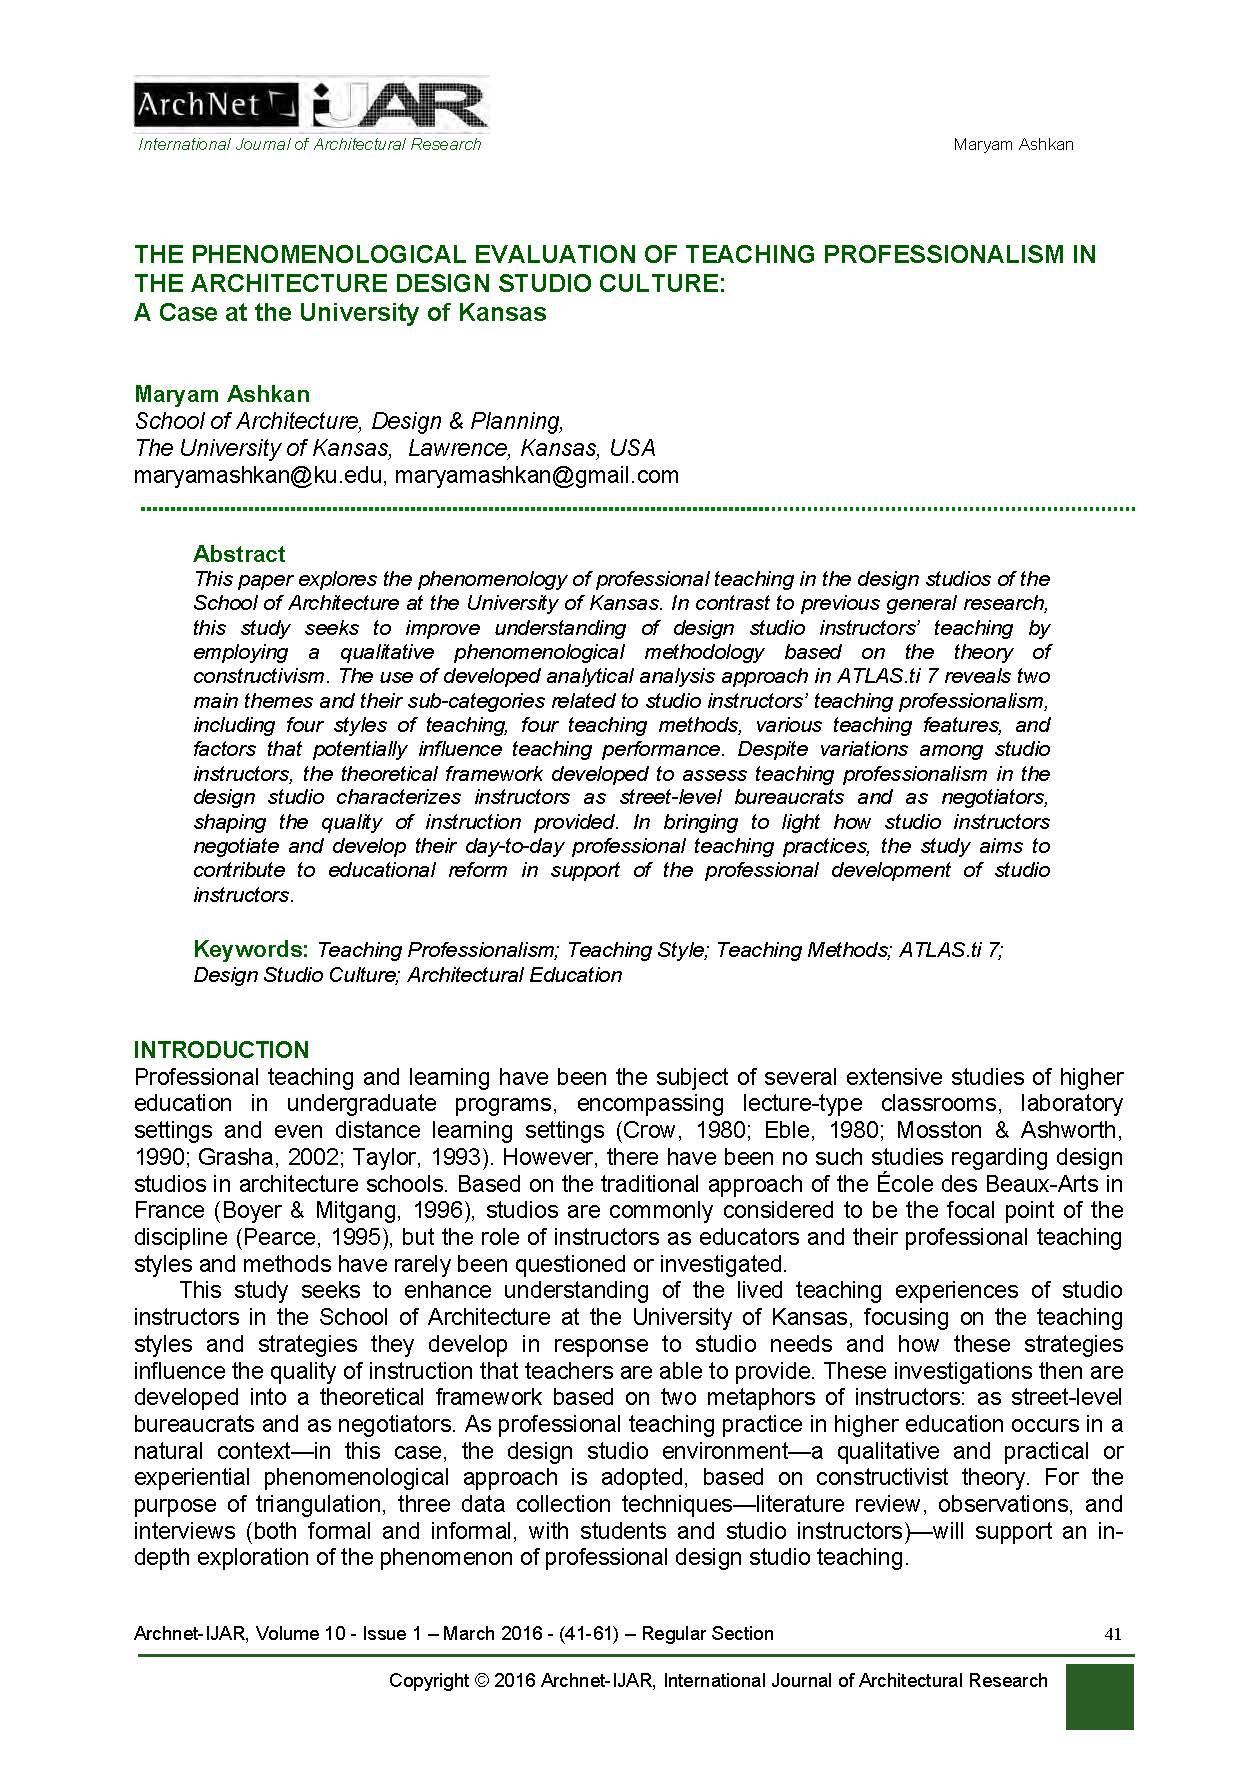 Maryam Ashkan - 







<p class="p1"><span class="s1">This paper explores the phenomenology of professional teaching in the design studios of the School of Architecture at the University of Kansas. In contrast to previous general research, this study seeks to improve understanding of design studio instructors' teaching by employing a qualitative phenomenological methodology based on the theory of constructivism. The use of developed analytical analysis approach in ATLAS.ti 7 reveals two main themes and their sub-categories related to studio instructors' teaching professionalism, including four styles of teaching, four teaching methods, various teaching features, and factors that potentially influence teaching performance. Despite variations among studio instructors, the theoretical framework developed to assess teaching professionalism in the design studio characterizes instructors as street-level bureaucrats and as negotiators, shaping the quality of instruction provided. In bringing to light how studio instructors negotiate and develop their day-to-day professional teaching practices, the study aims to contribute to educational reform in support of the professional development of studio instructors.</span></p>
<p class="p3"><span class="s1" style="font-weight: bold;">Keywords</span></p>
<p class="p4"><span class="s1">Teaching Professionalism; Teaching Style; Teaching Methods; ATLAS.ti 7; Design Studio Culture; Architectural Education</span></p>